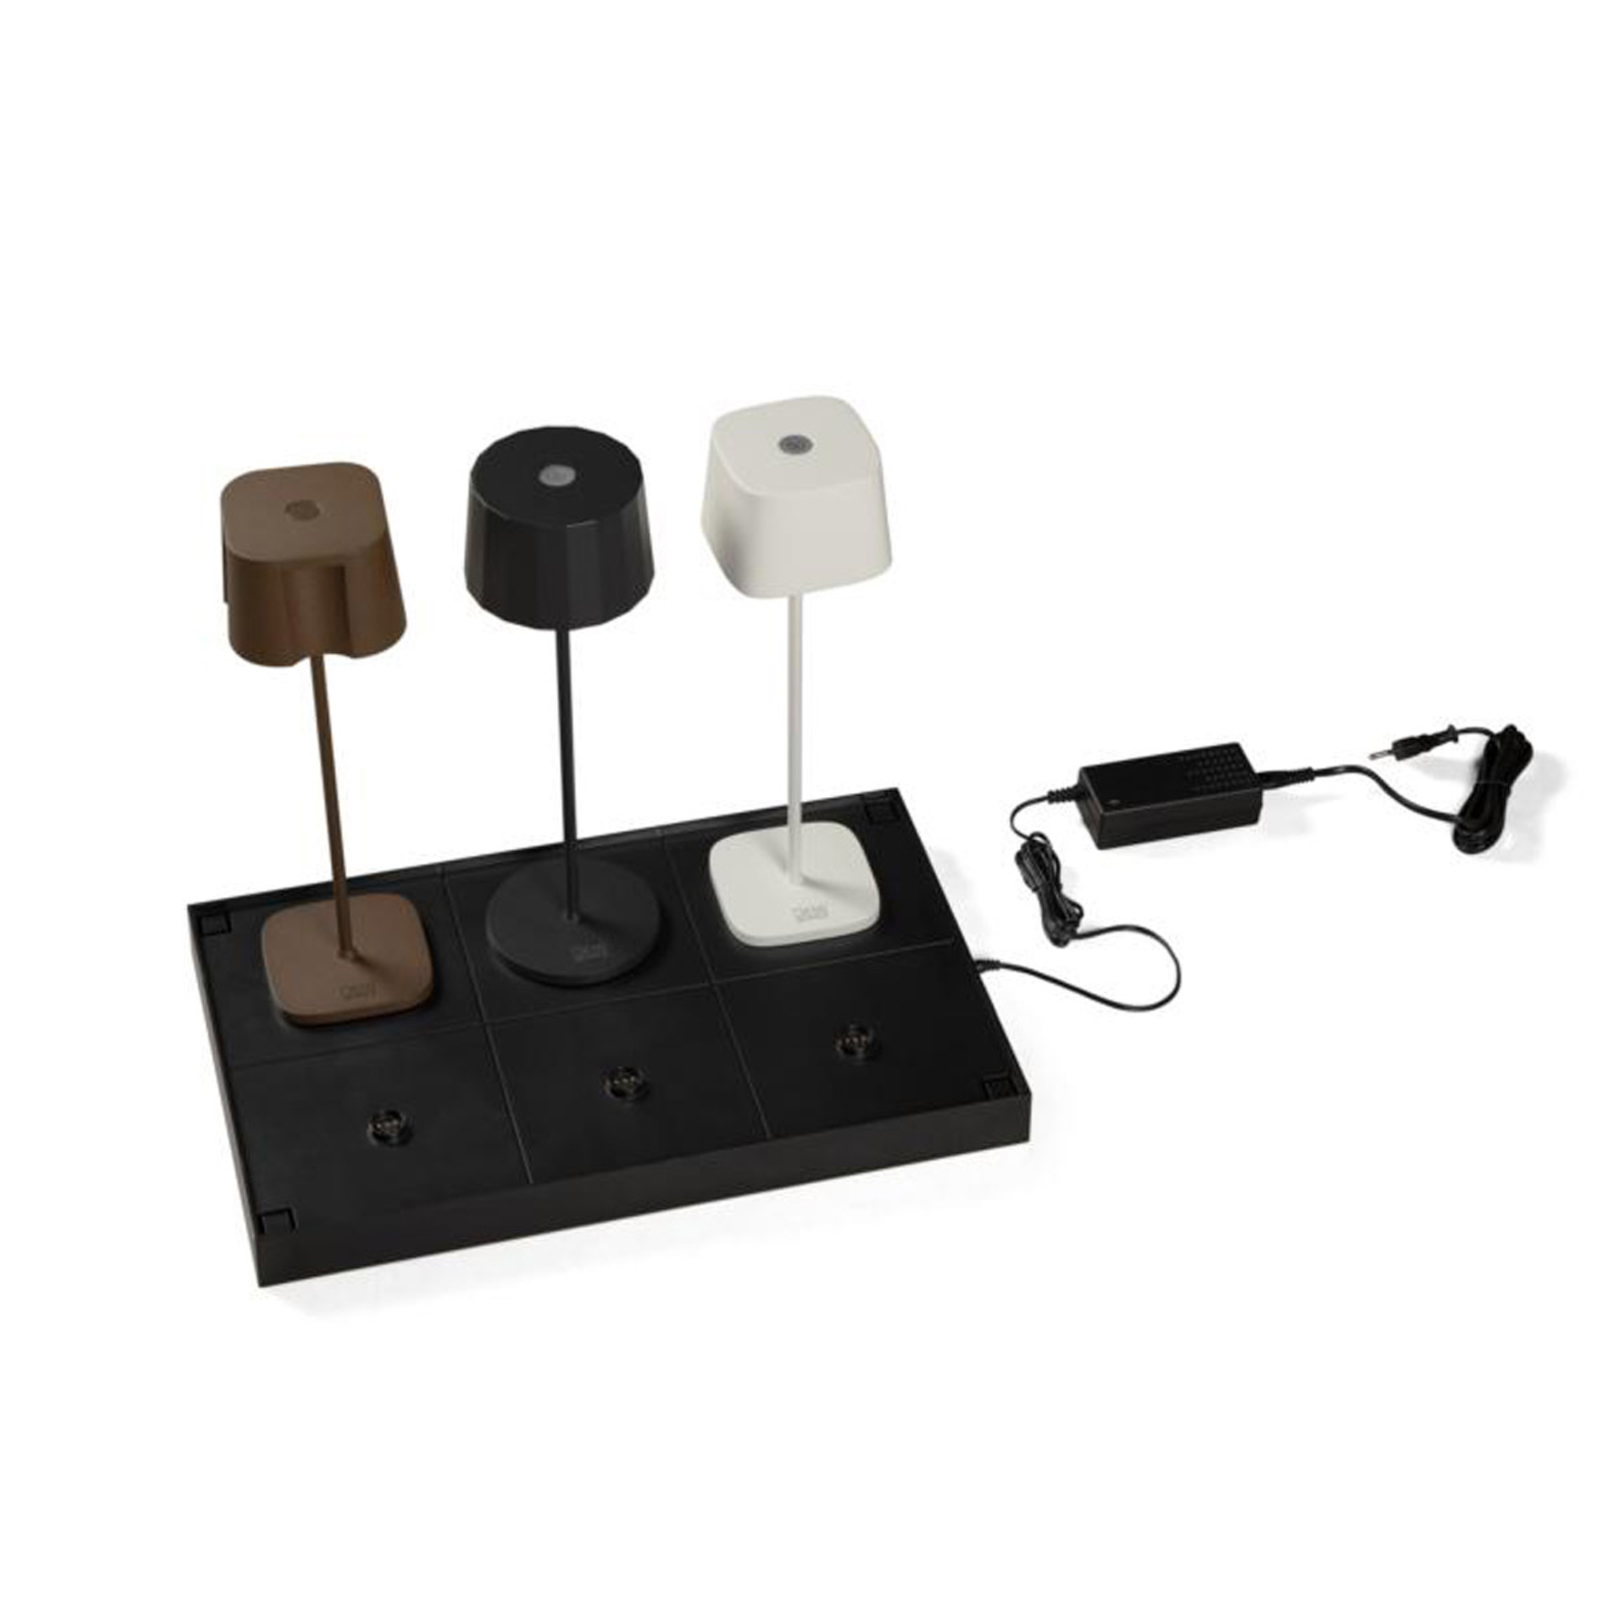 Charging station for Nice decorative light